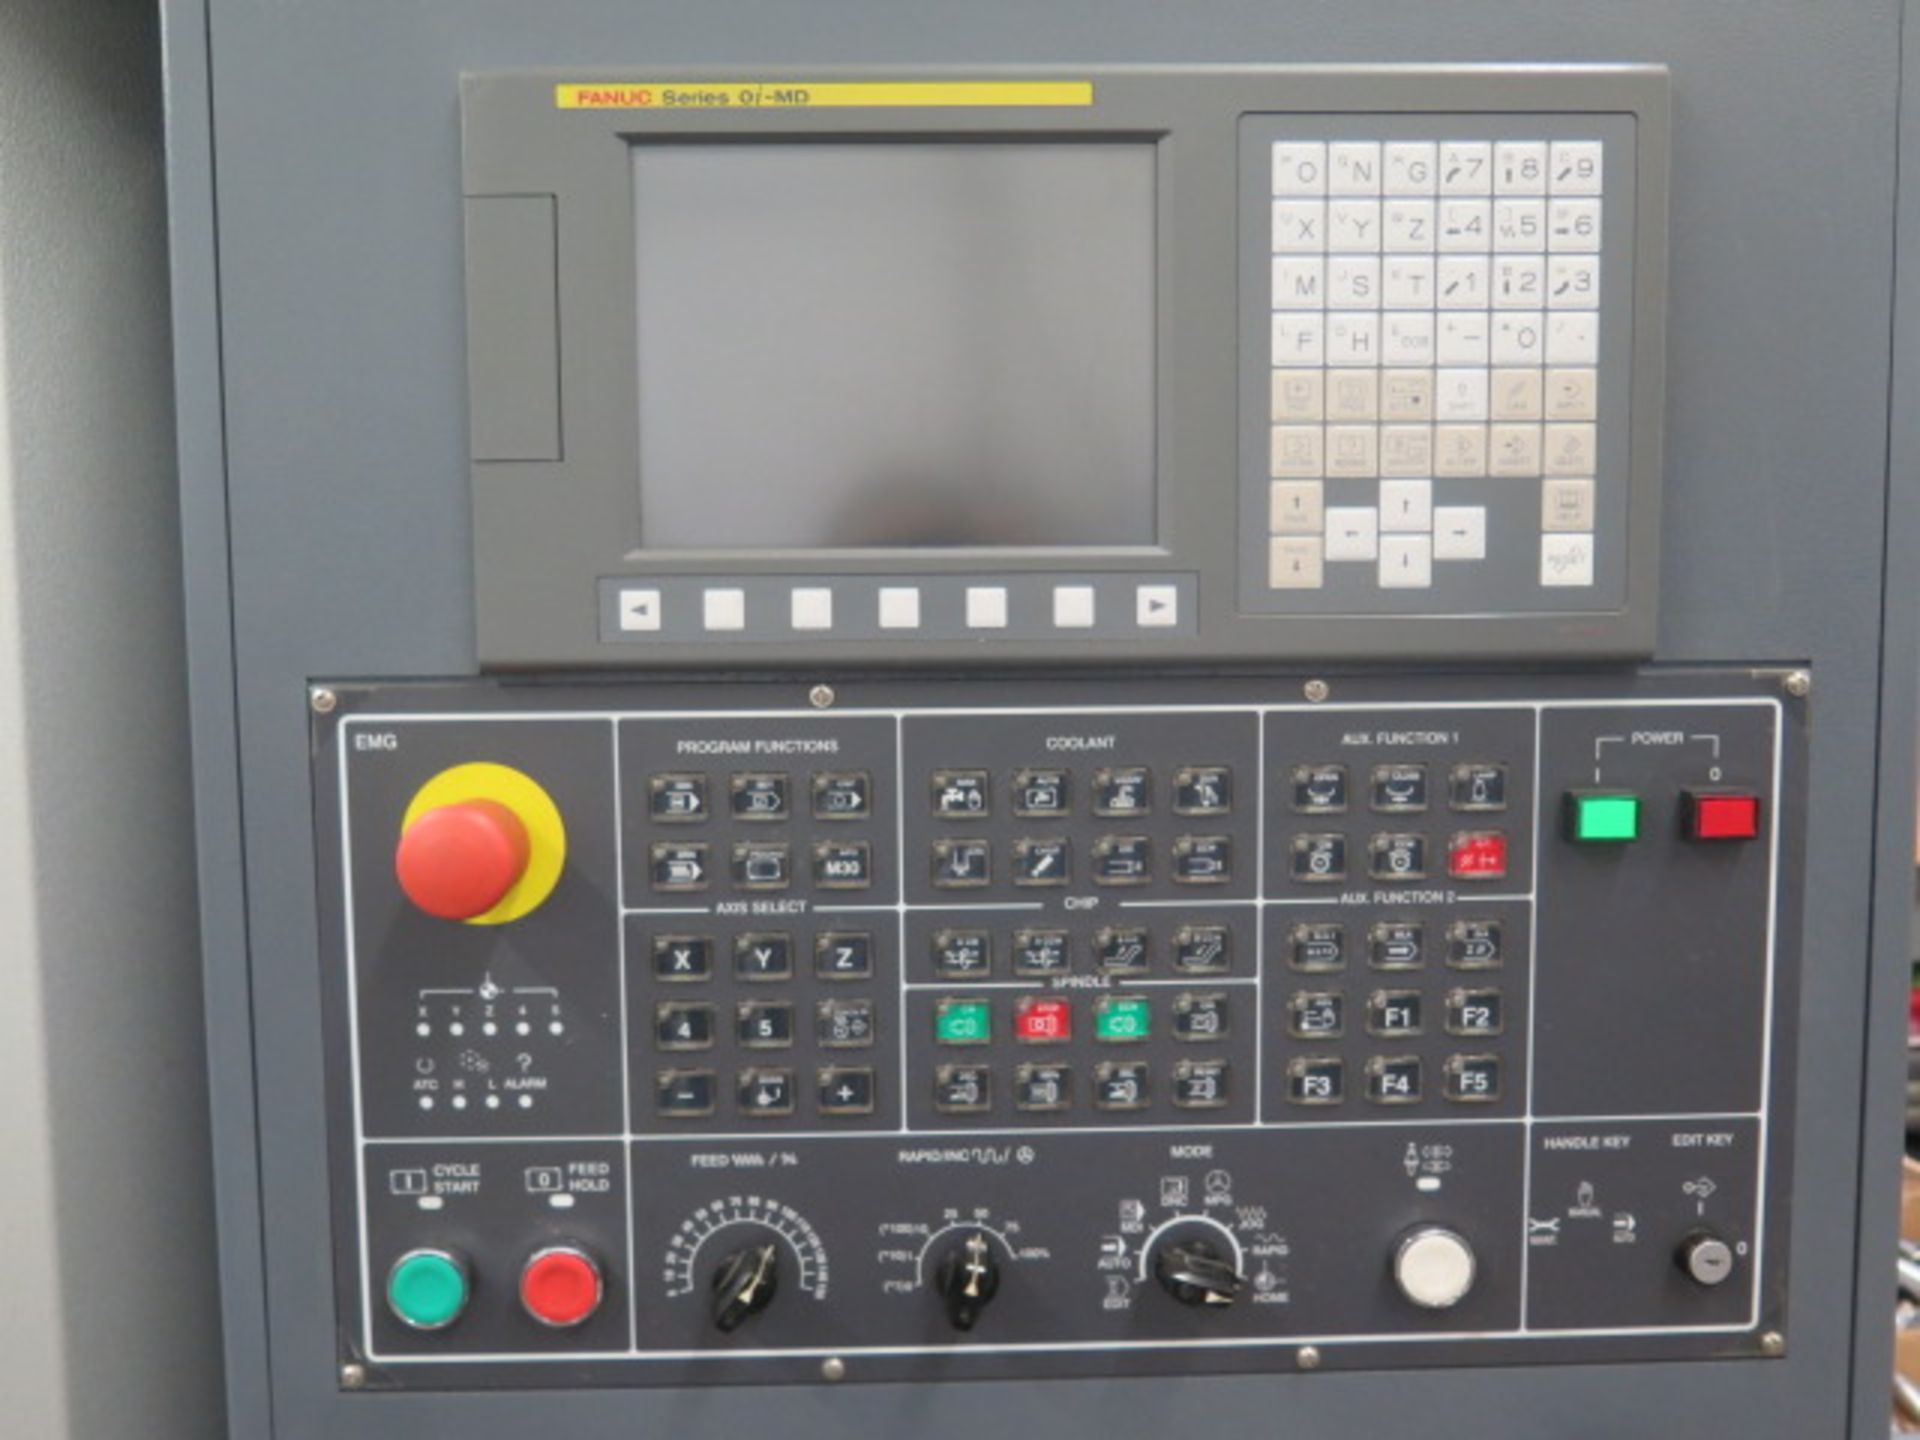 2011 Leadwell V-40 CNC VMC w/ Fanuc Series 0i-MD Controls, Hand Wheel, 24 ATC, SOLD AS IS - Image 9 of 13